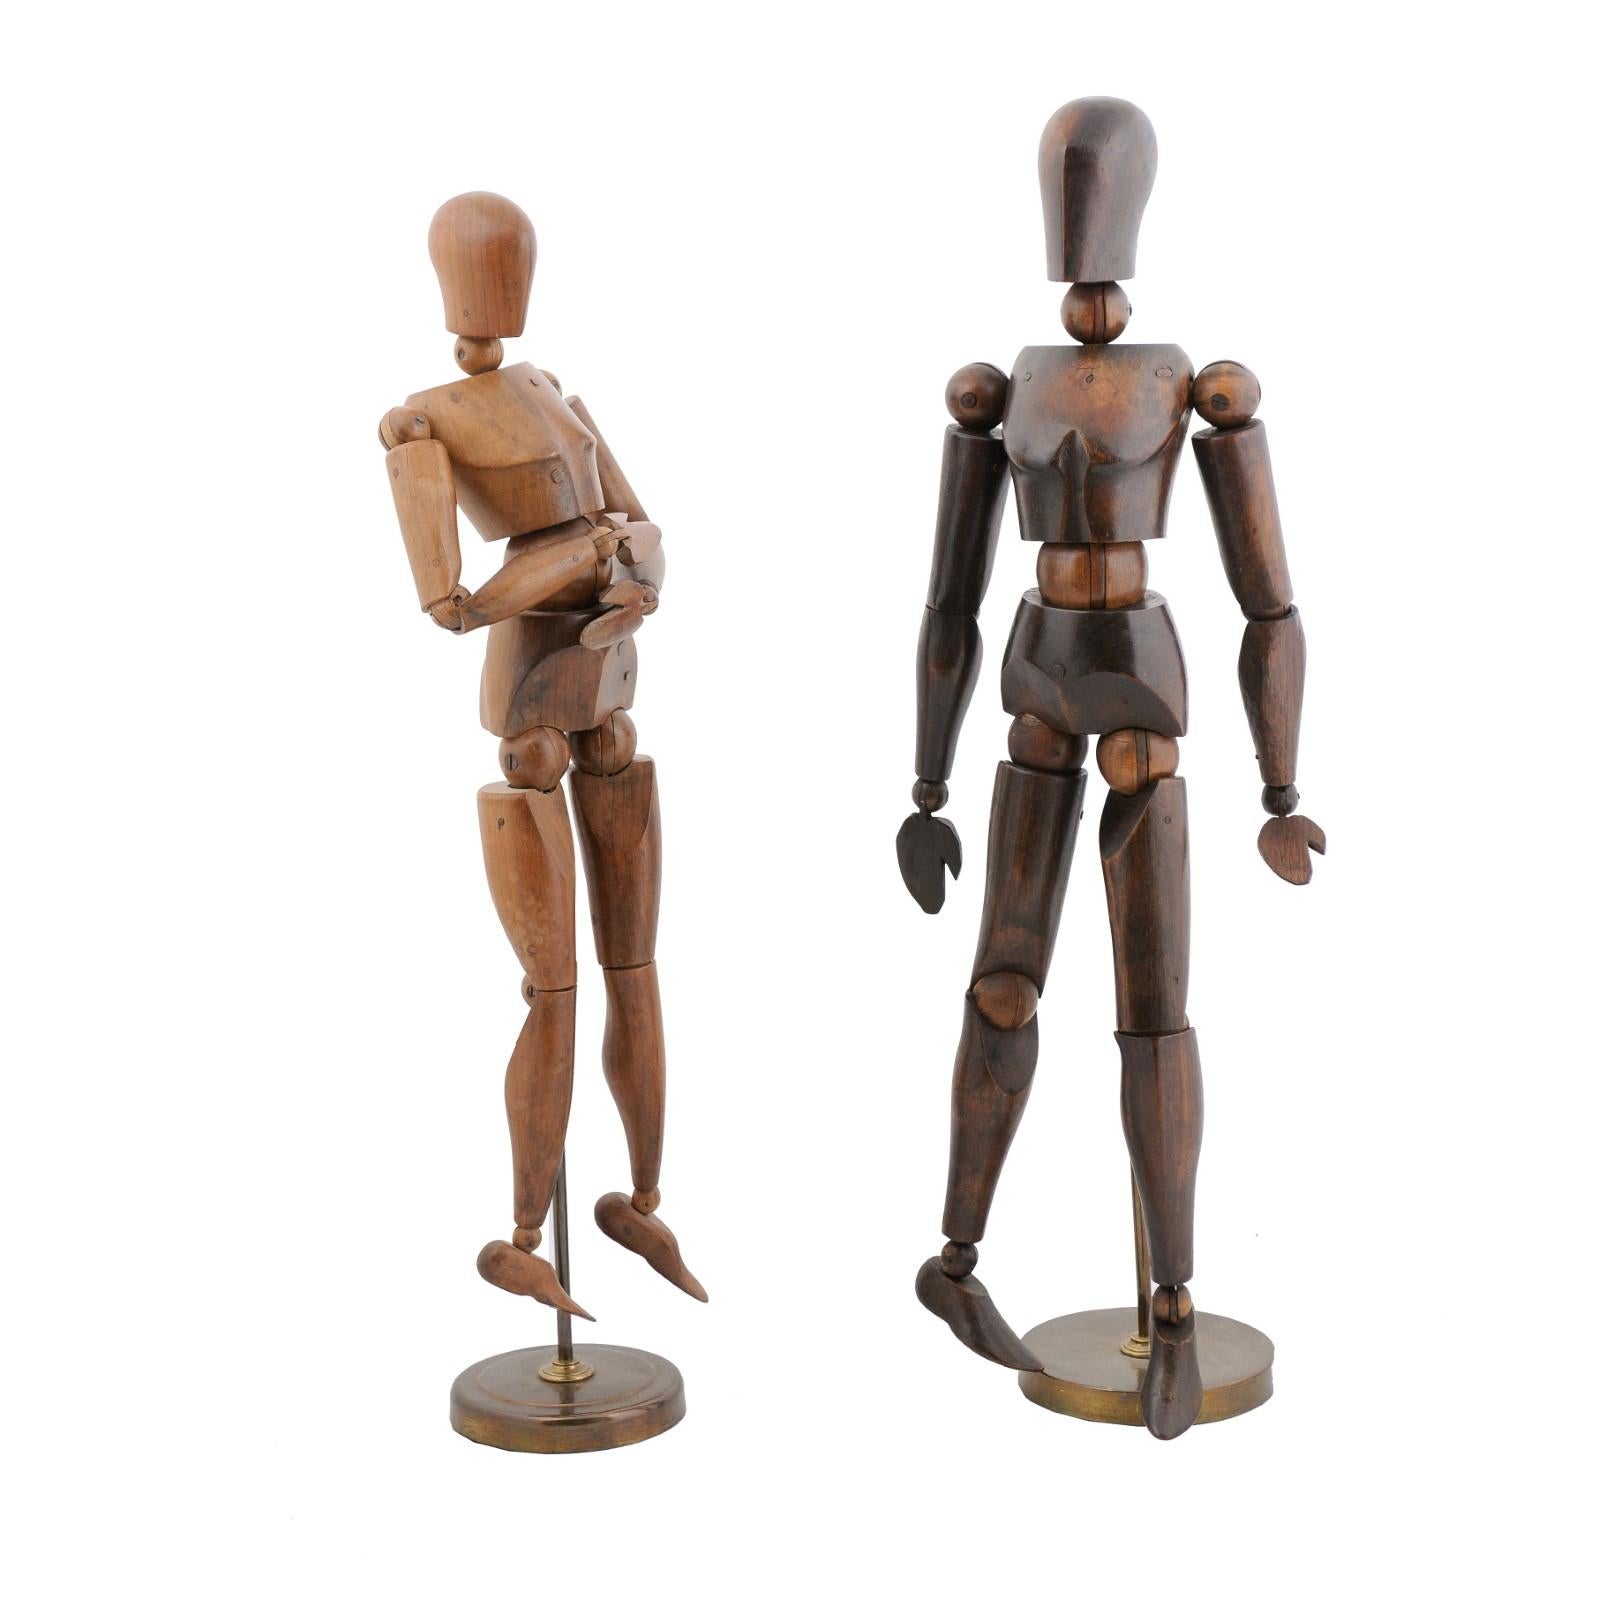 English 20th Century Artist's Articulated Wooden Mannequins on Bases, ONE AVAIL